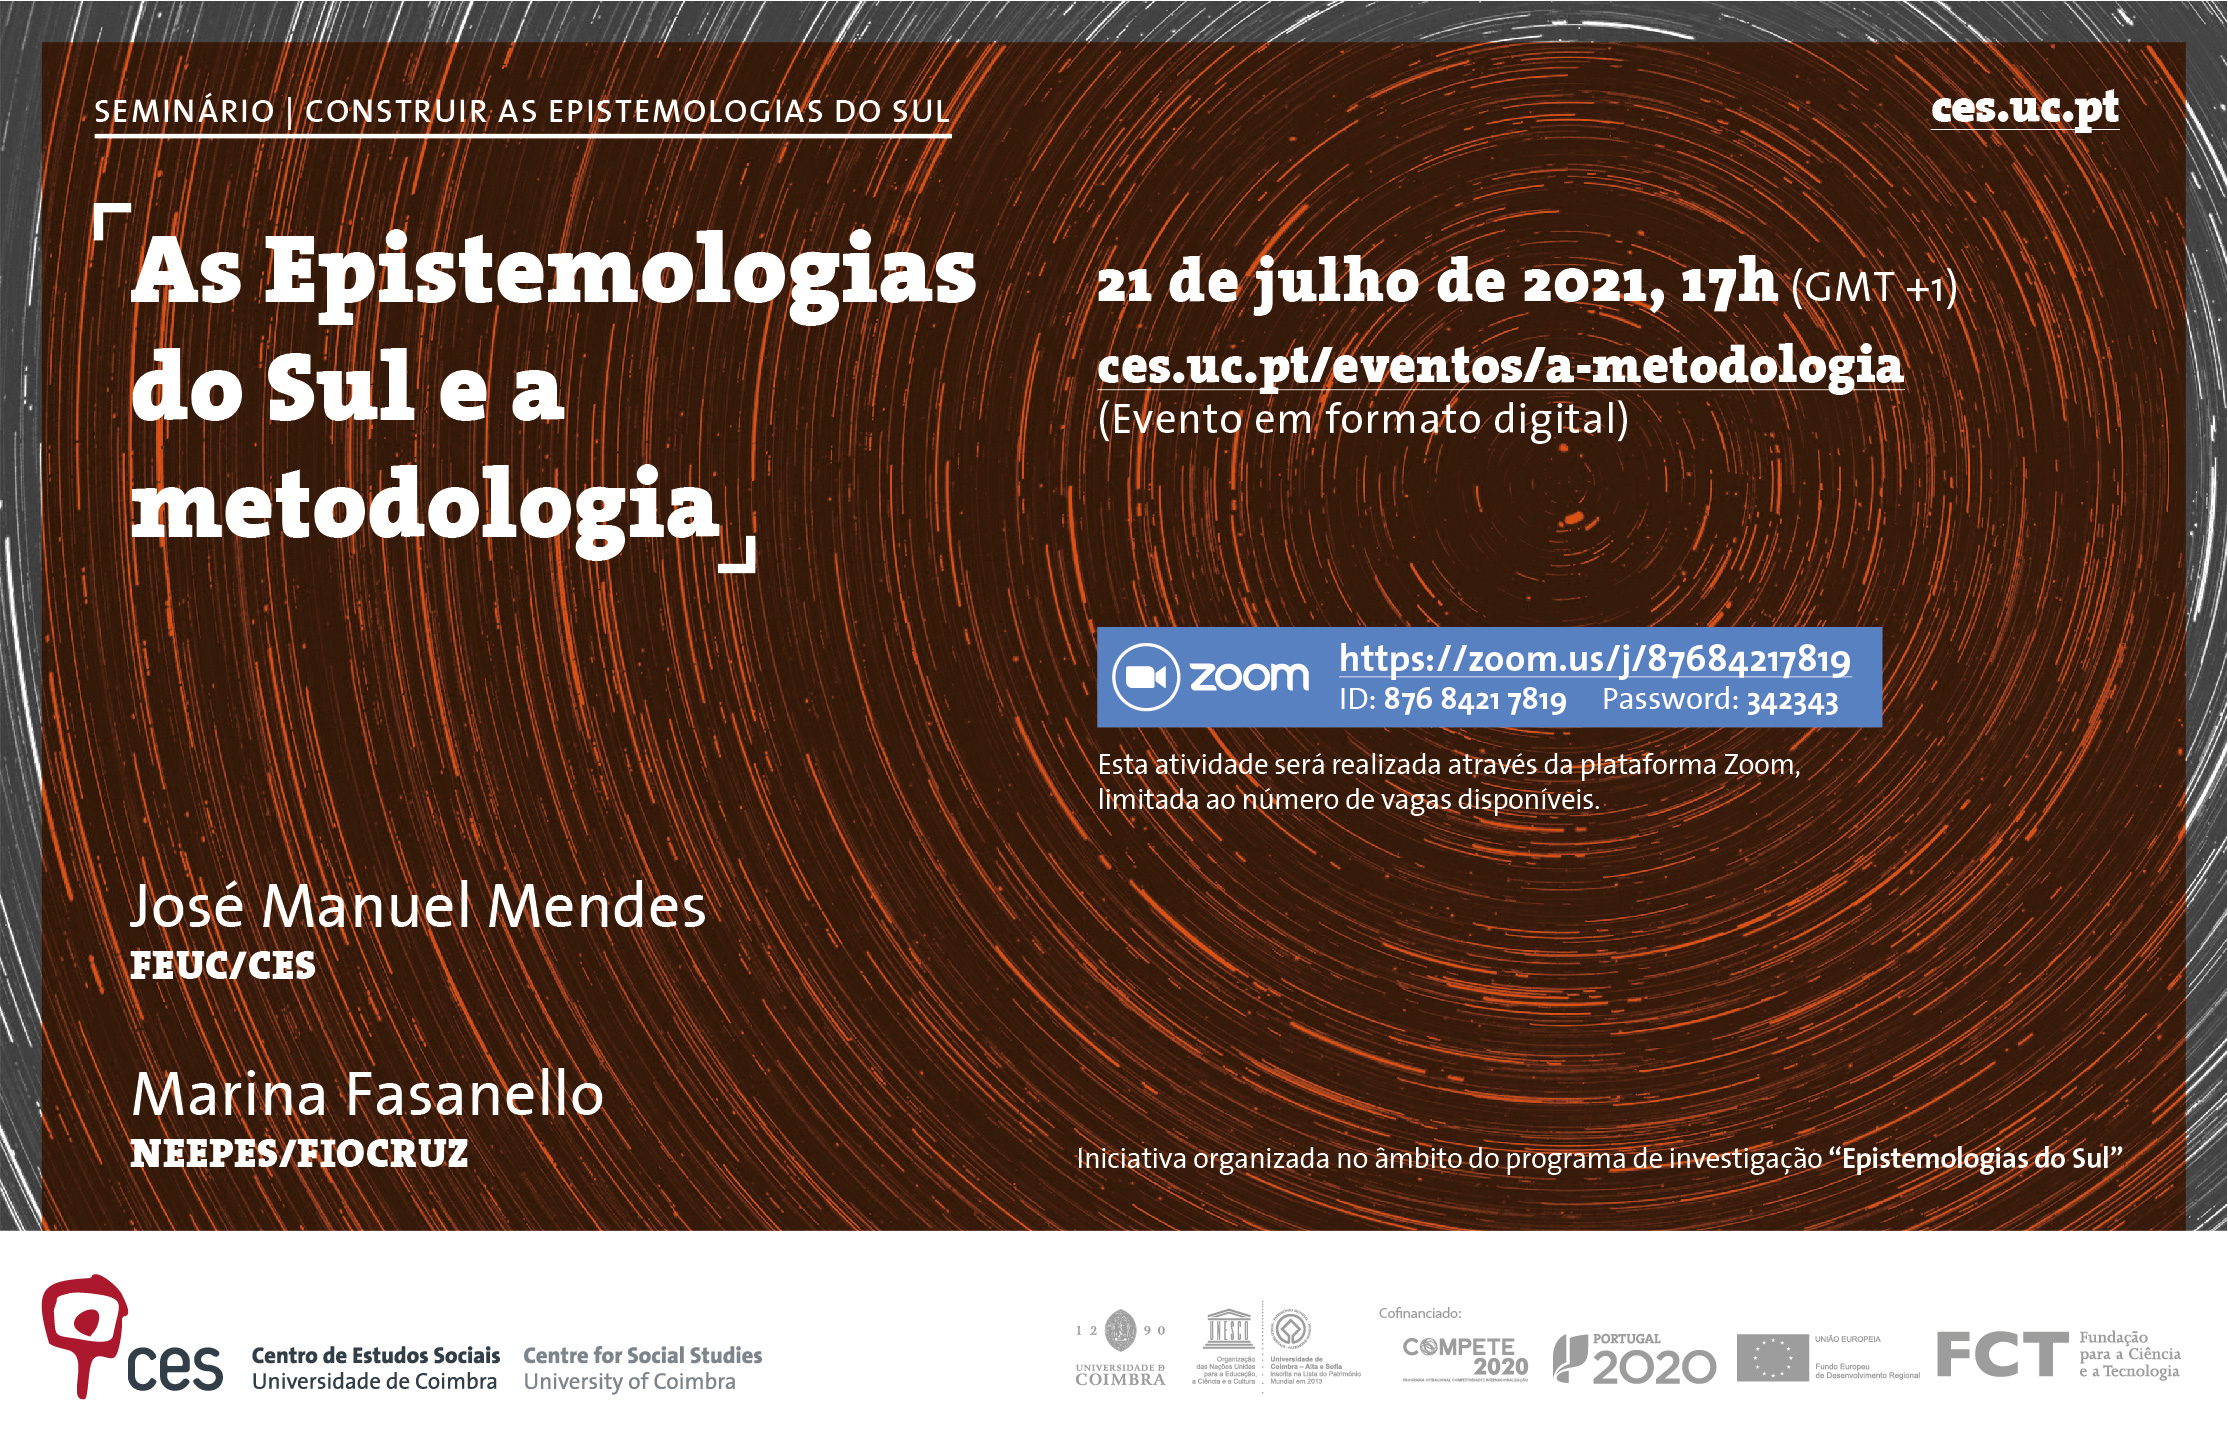 Epistemologies of the South and methodology<span id="edit_33586"><script>$(function() { $('#edit_33586').load( "/myces/user/editobj.php?tipo=evento&id=33586" ); });</script></span>